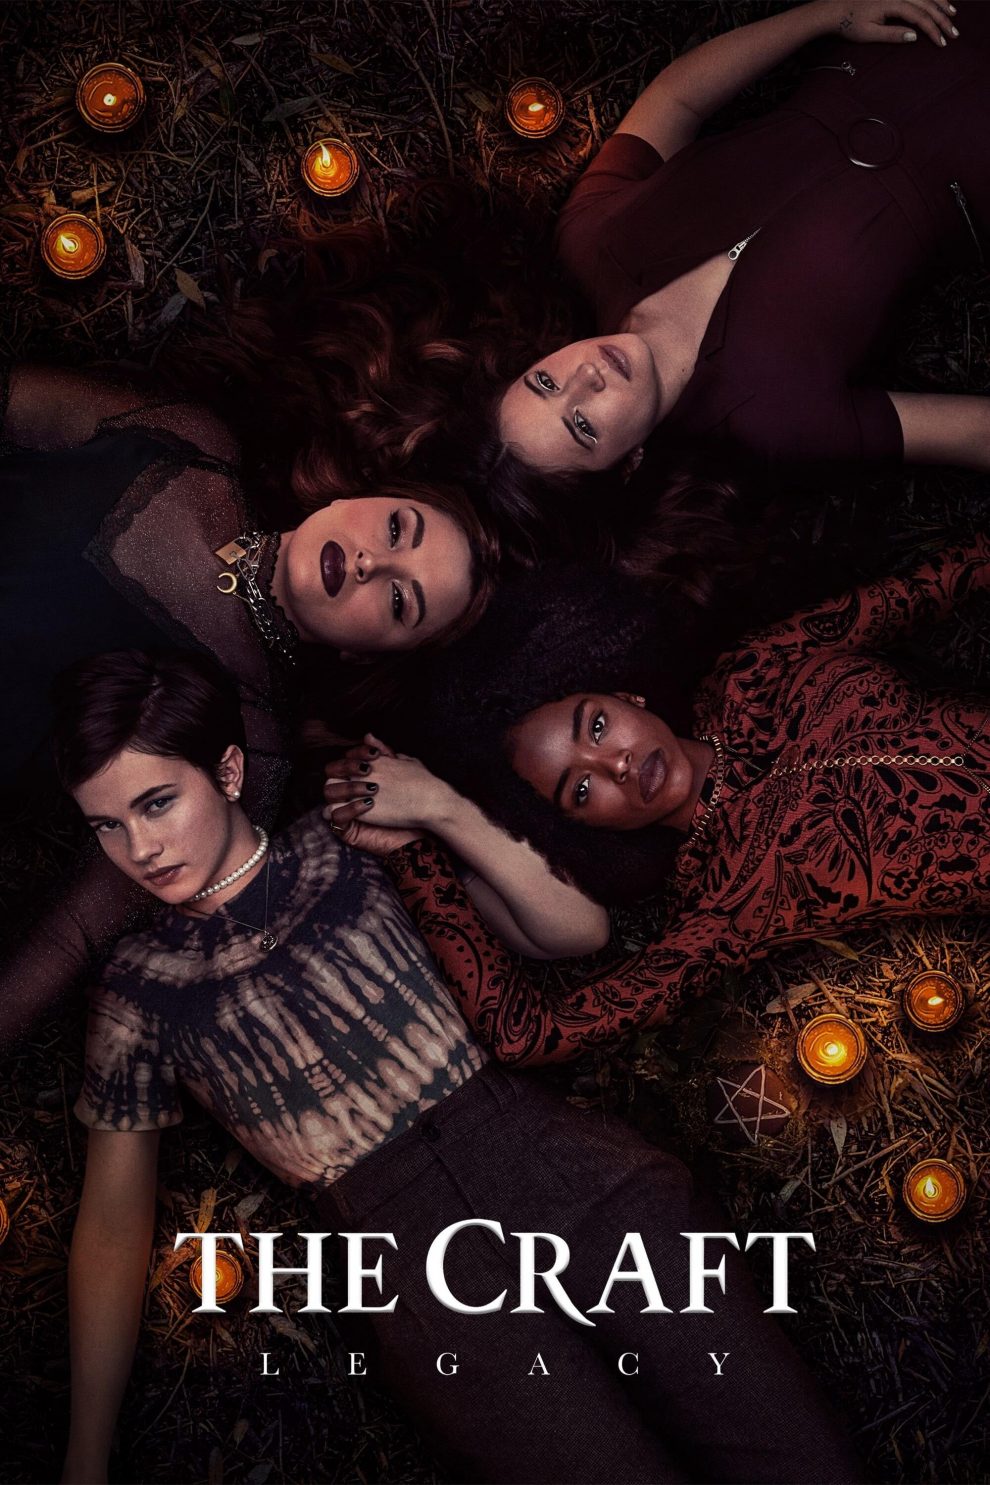 Poster for the movie "The Craft: Legacy"